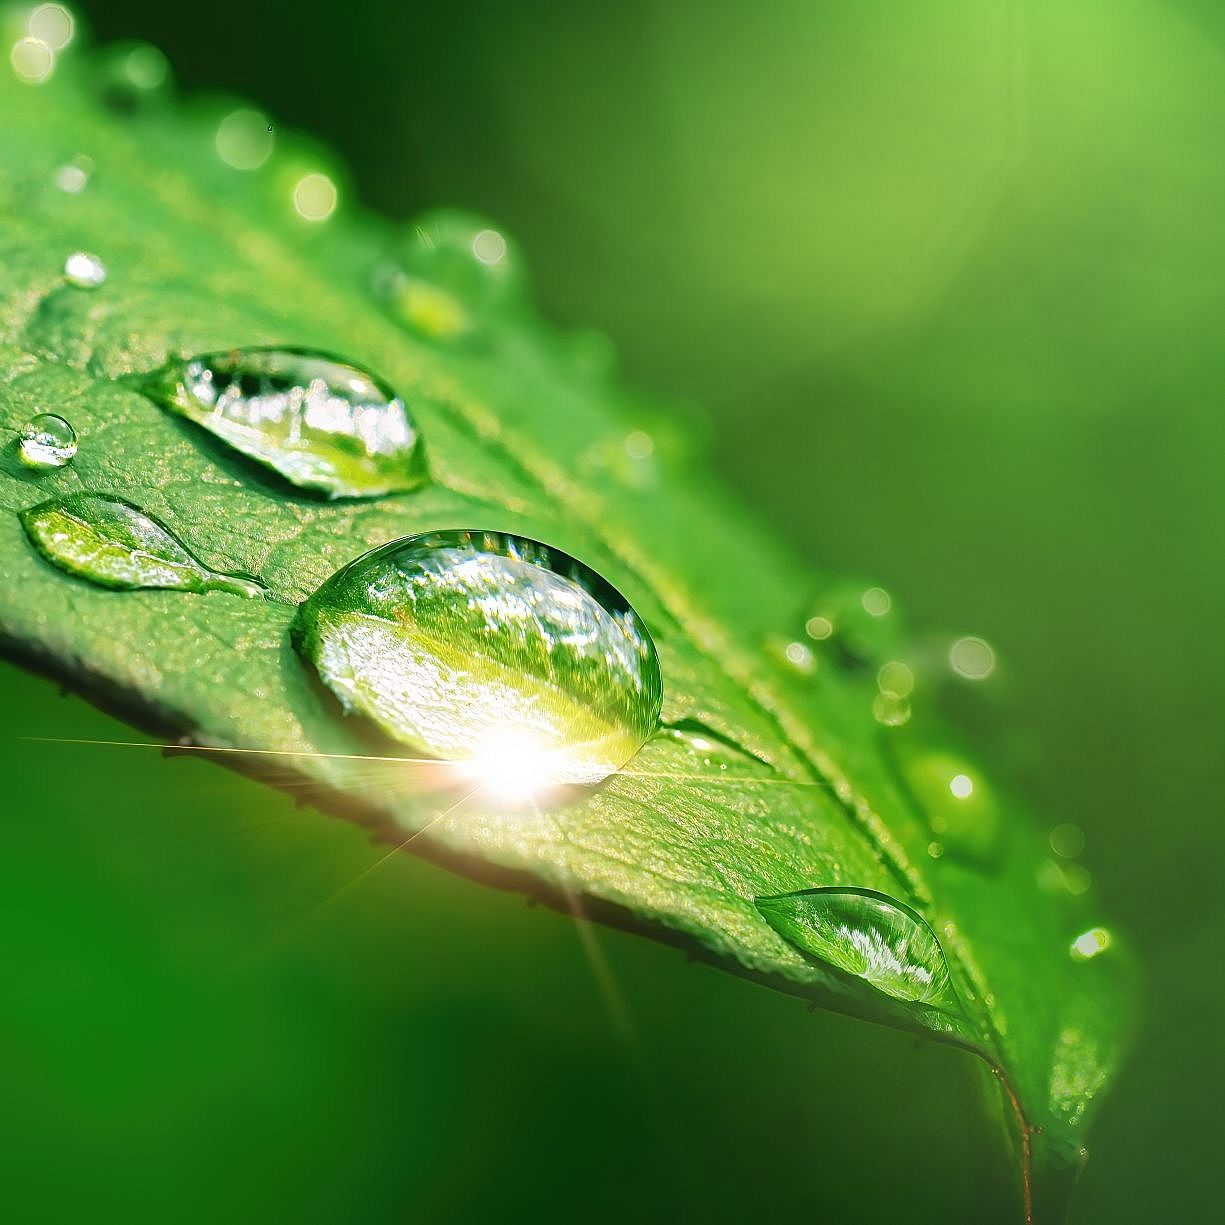 [Translate to Deutsch:] Droplets of water on a green leaf, symbolizing Rieter's sustainability strategy.